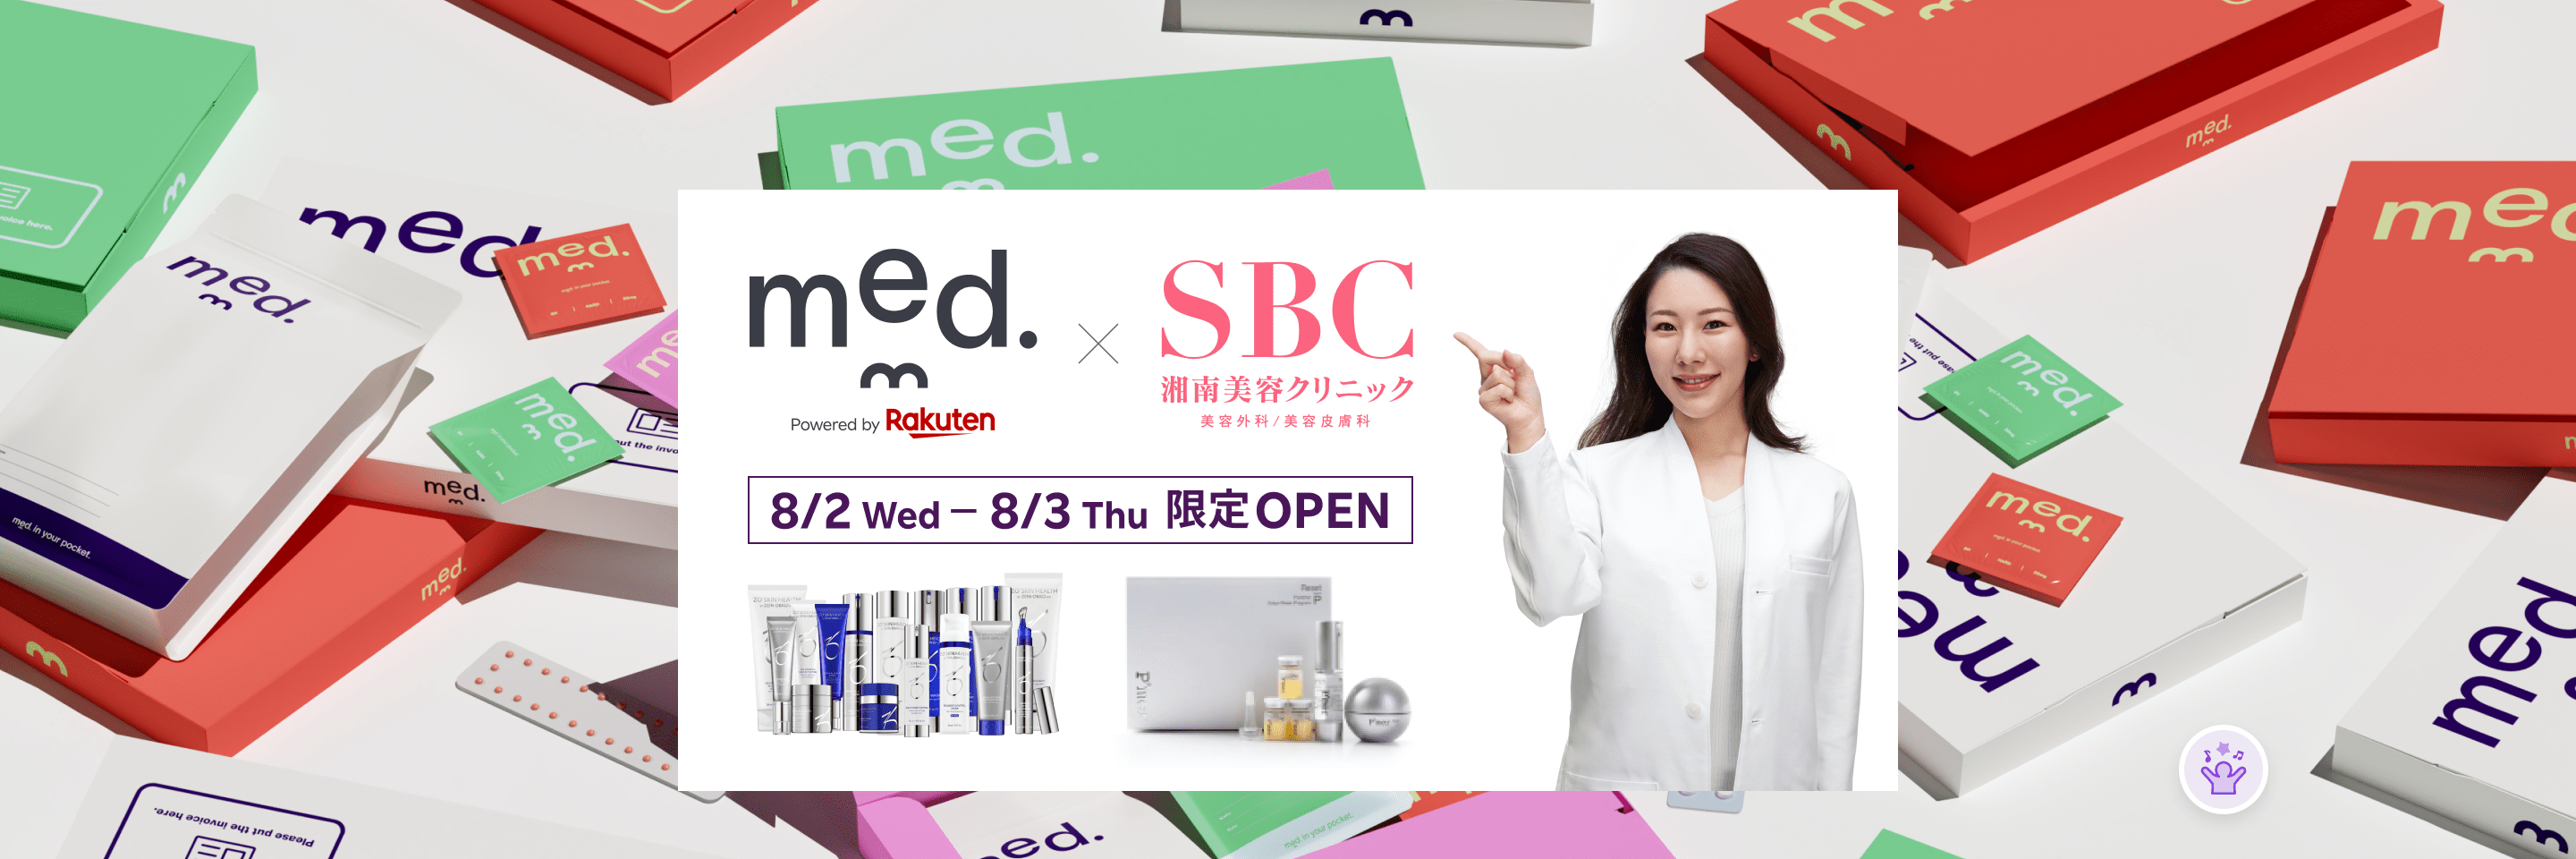 8/2 Wed - 8/3 Thu 限定OPEN